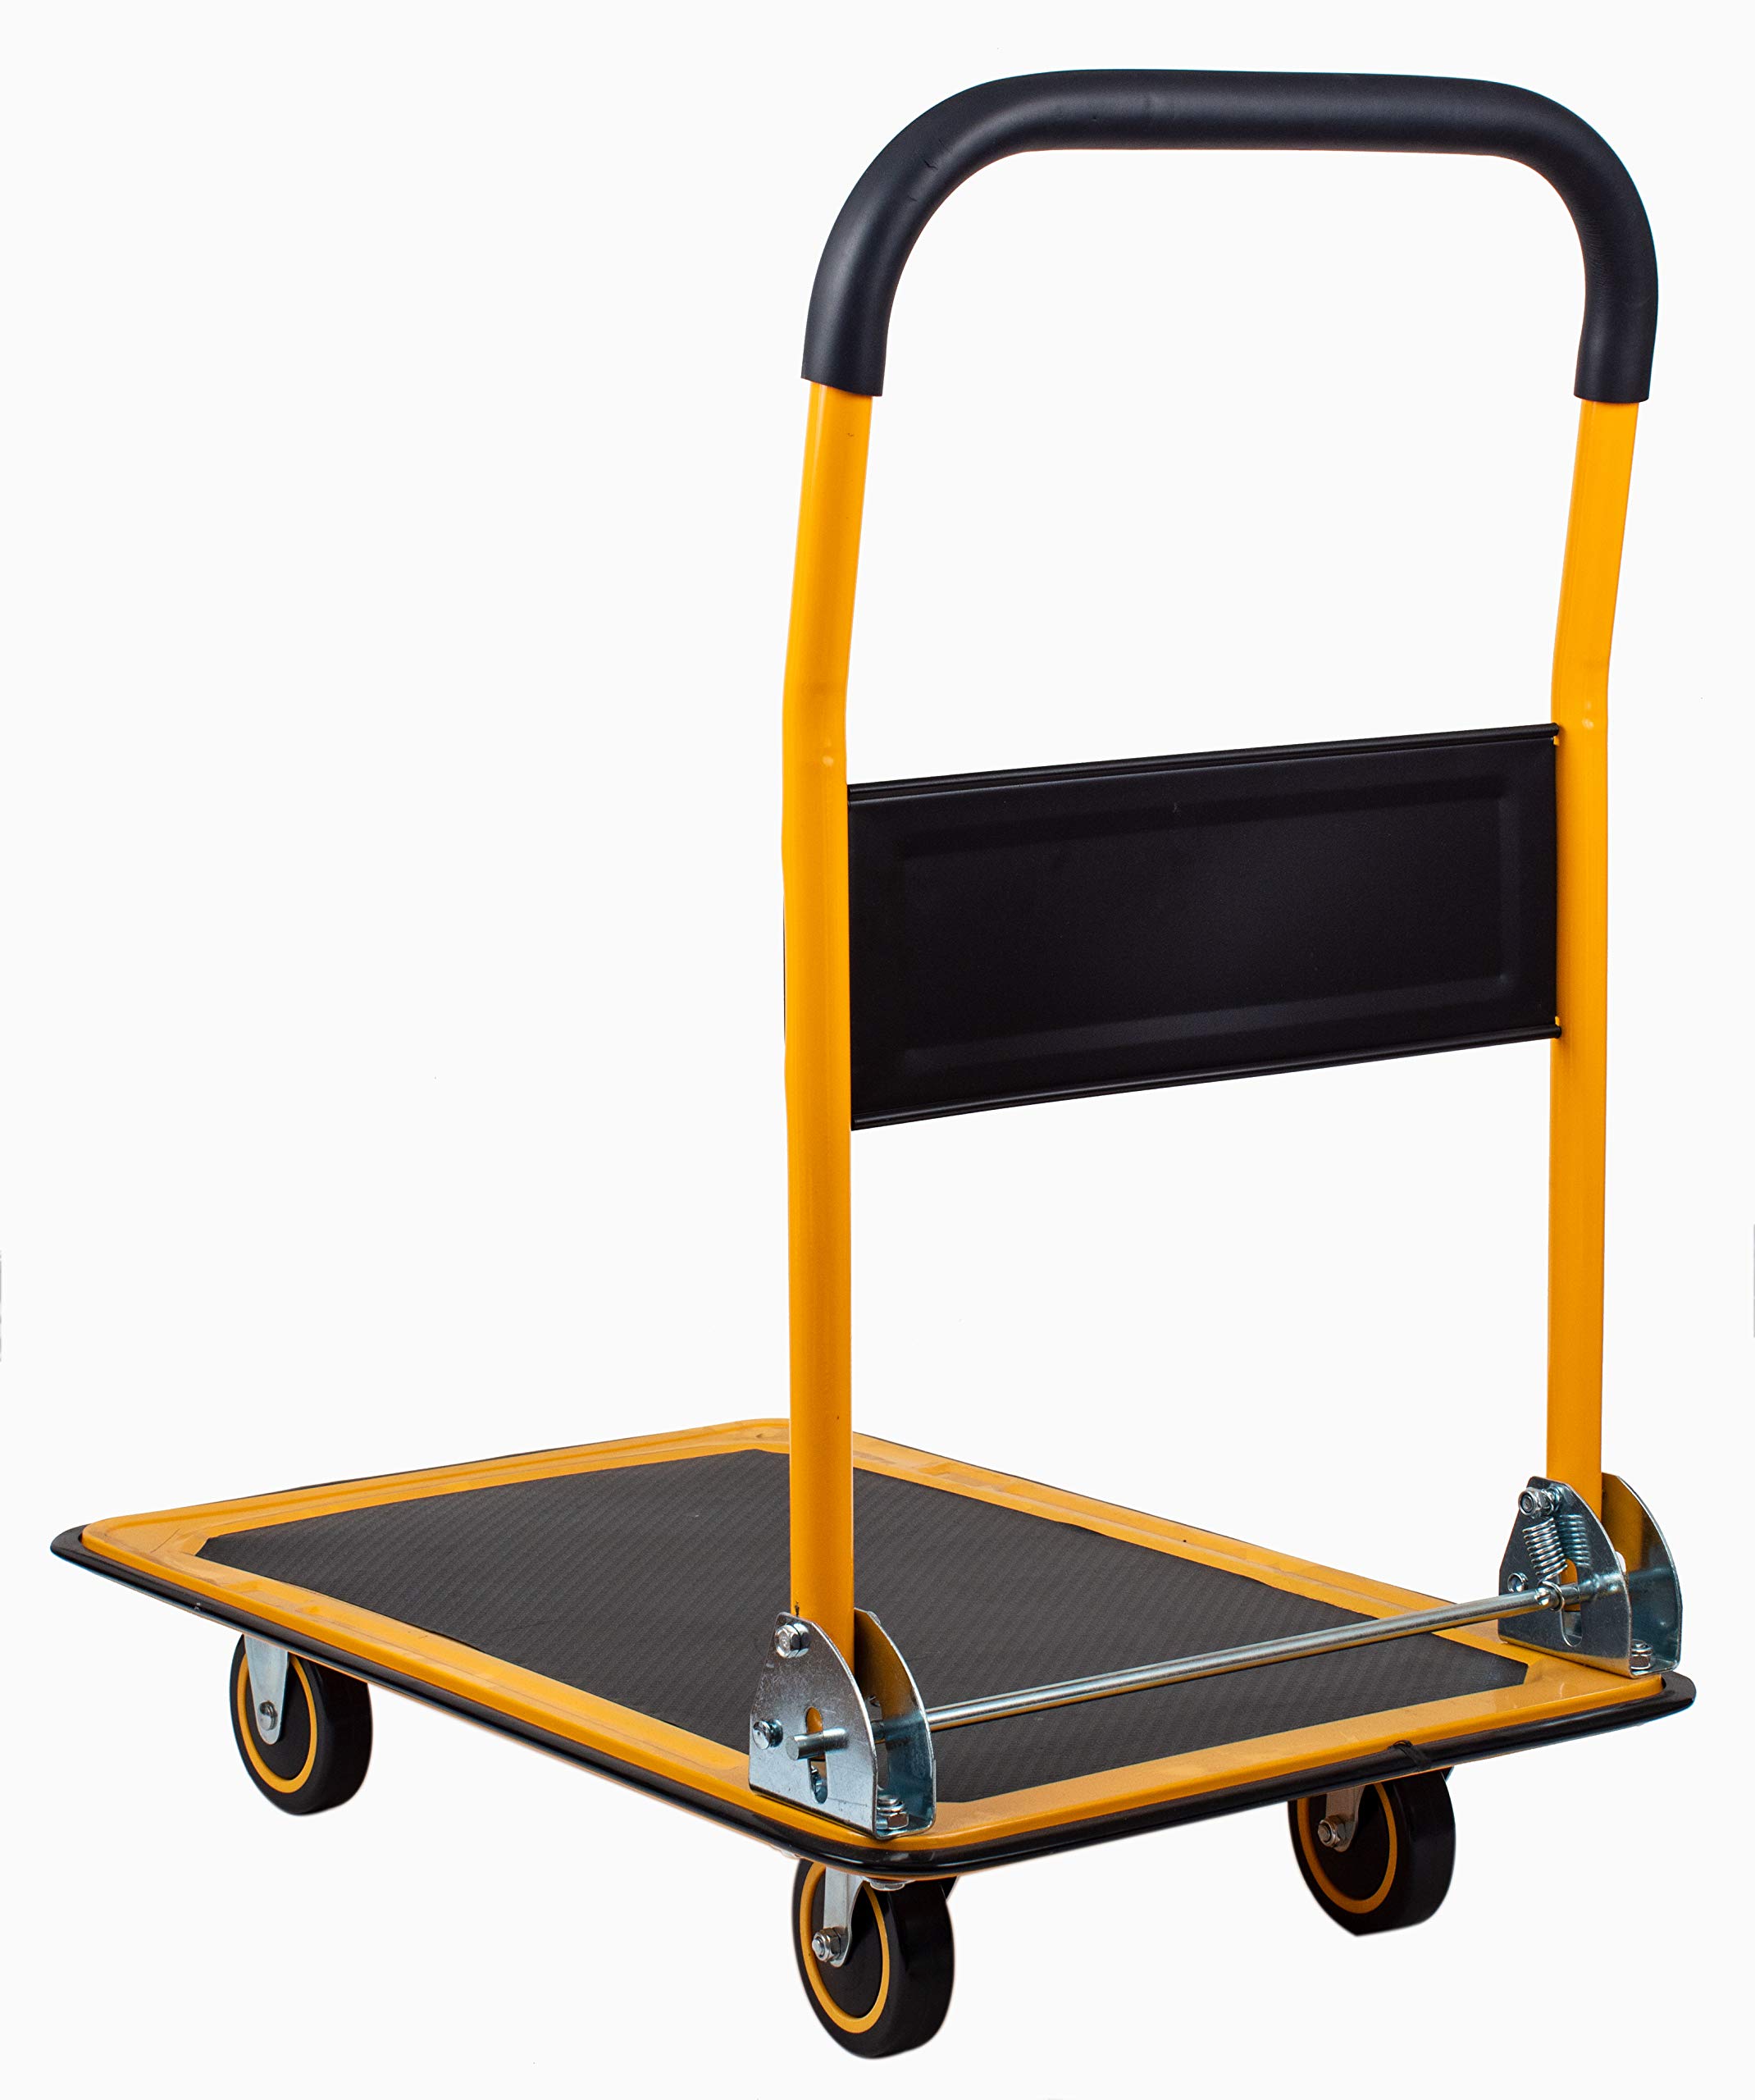 MaxWorks 80855 500-Pound Service Cart with Two Trays 30"X16" & 80876- Foldable Platform Truck Push Dolly 330 lb. Weight Capacity